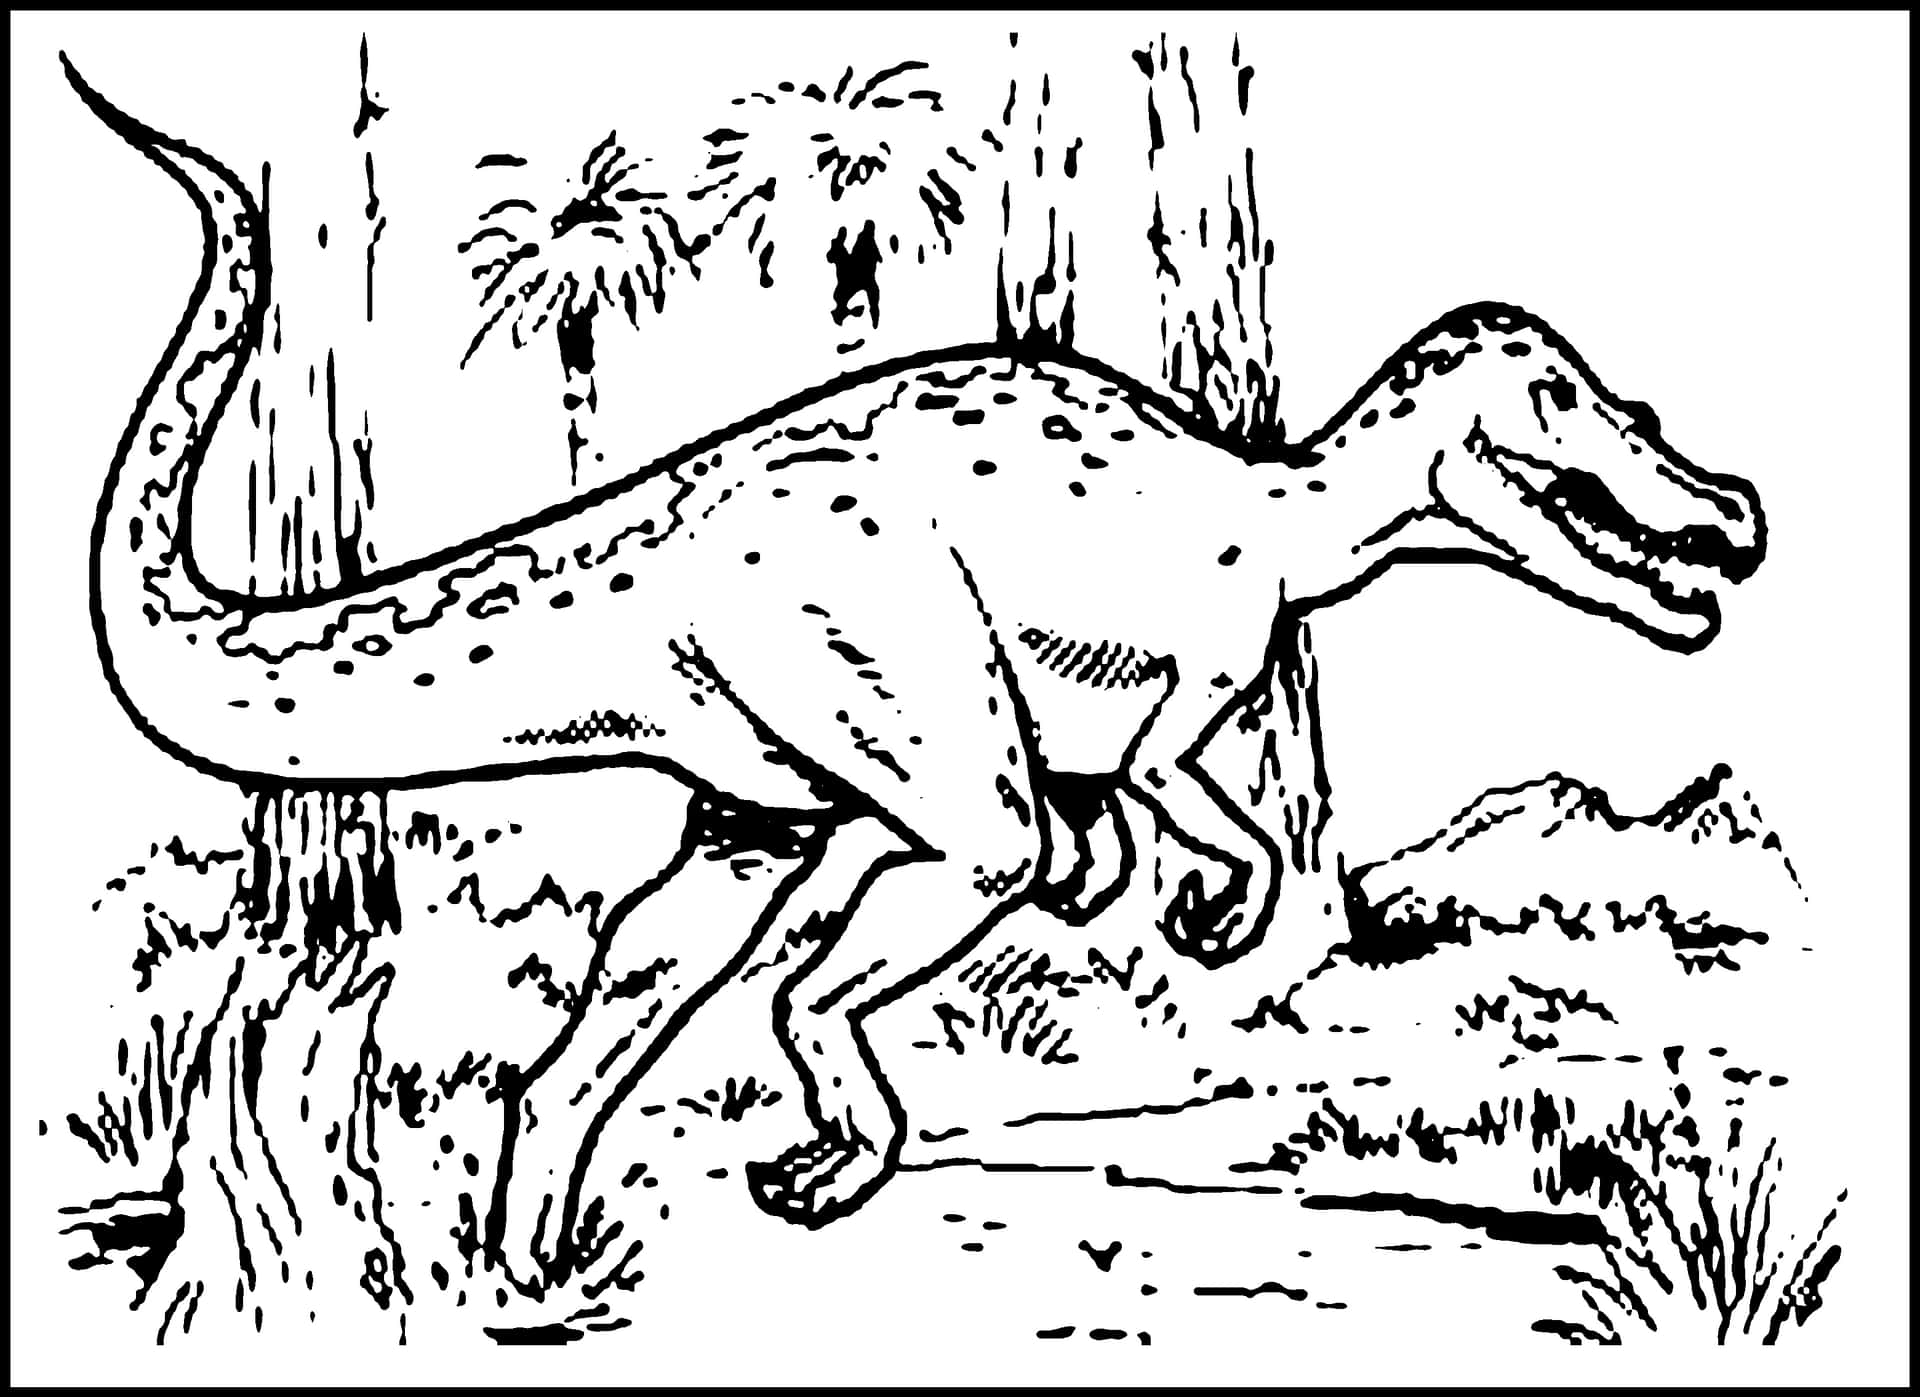 Color an exciting dinosaur adventure